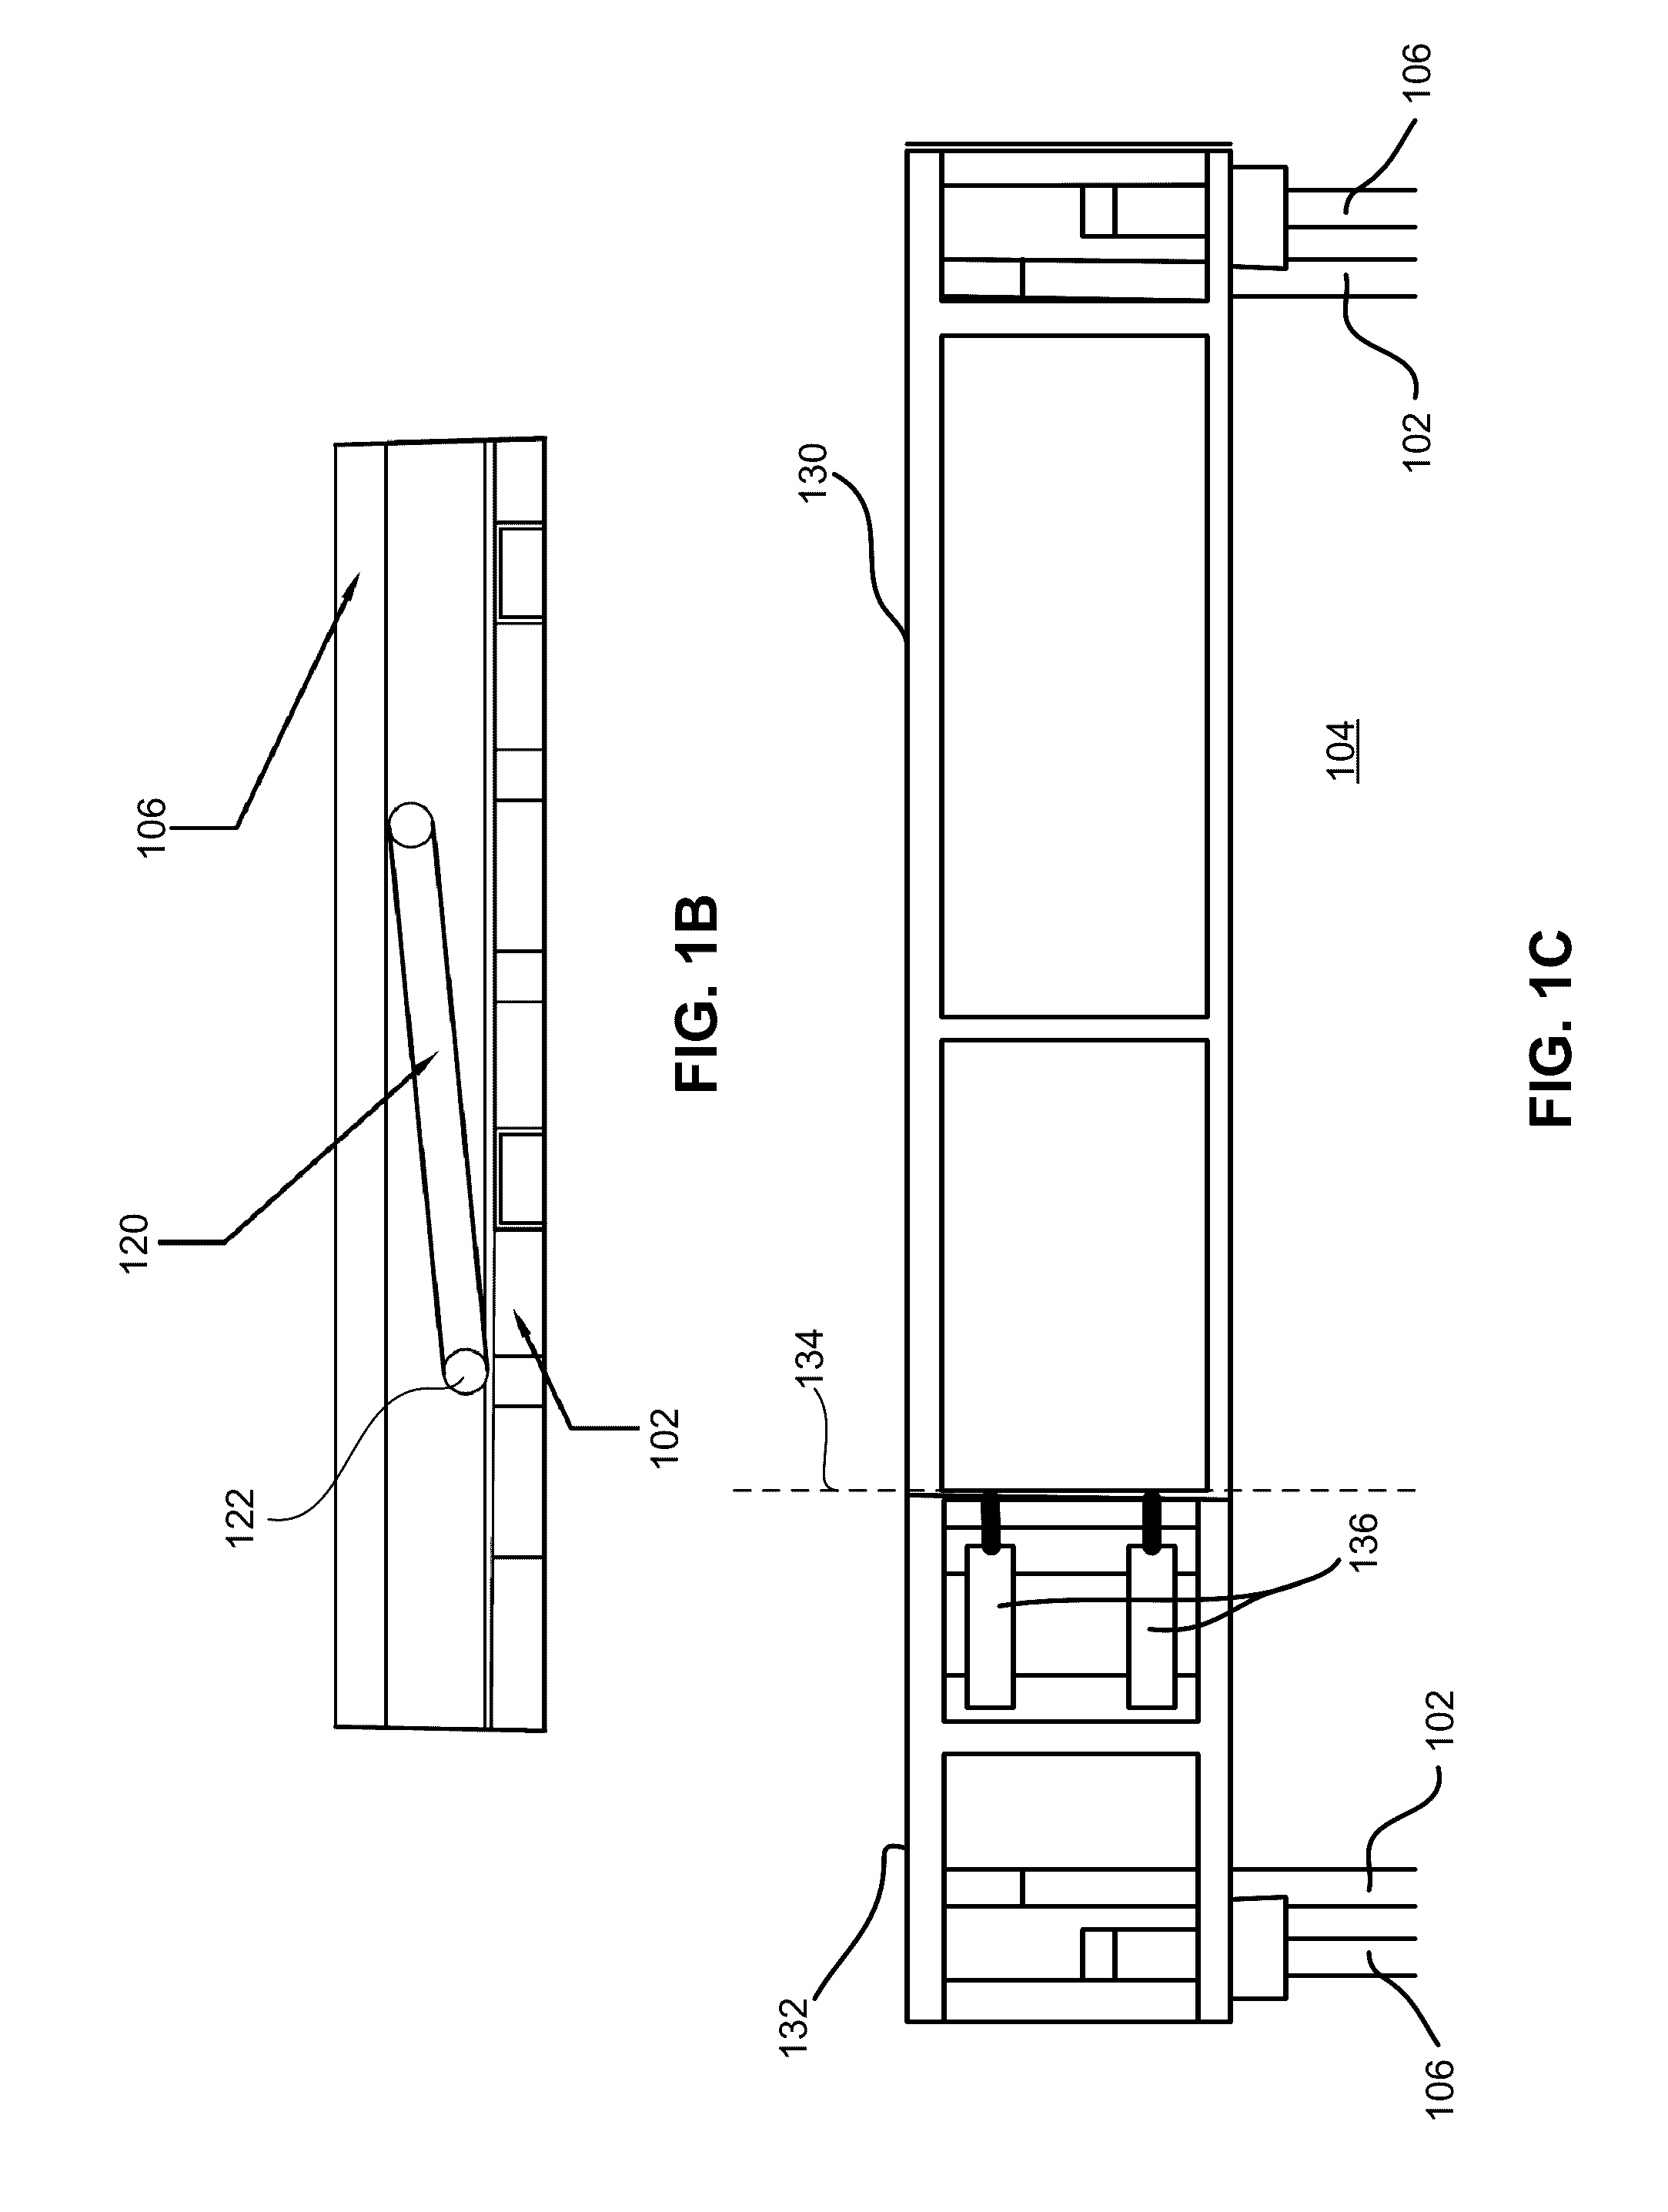 Method and system of improved tarp tensioning